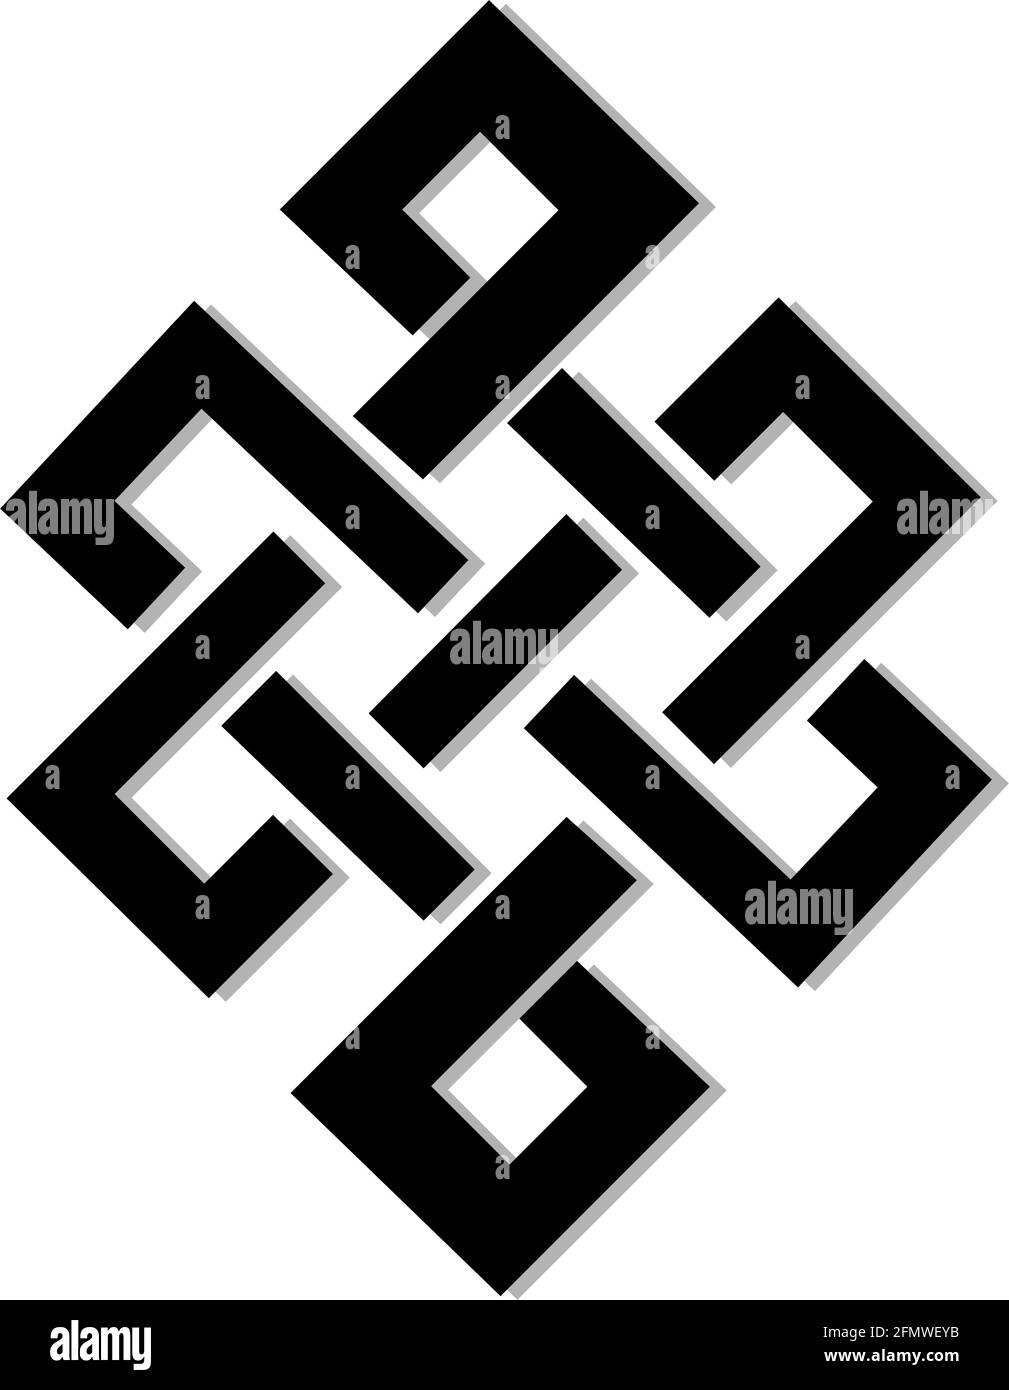 CELTIC KNOT SYMBOL IN BLACK COLOR WITH SHADOW Stock Vector